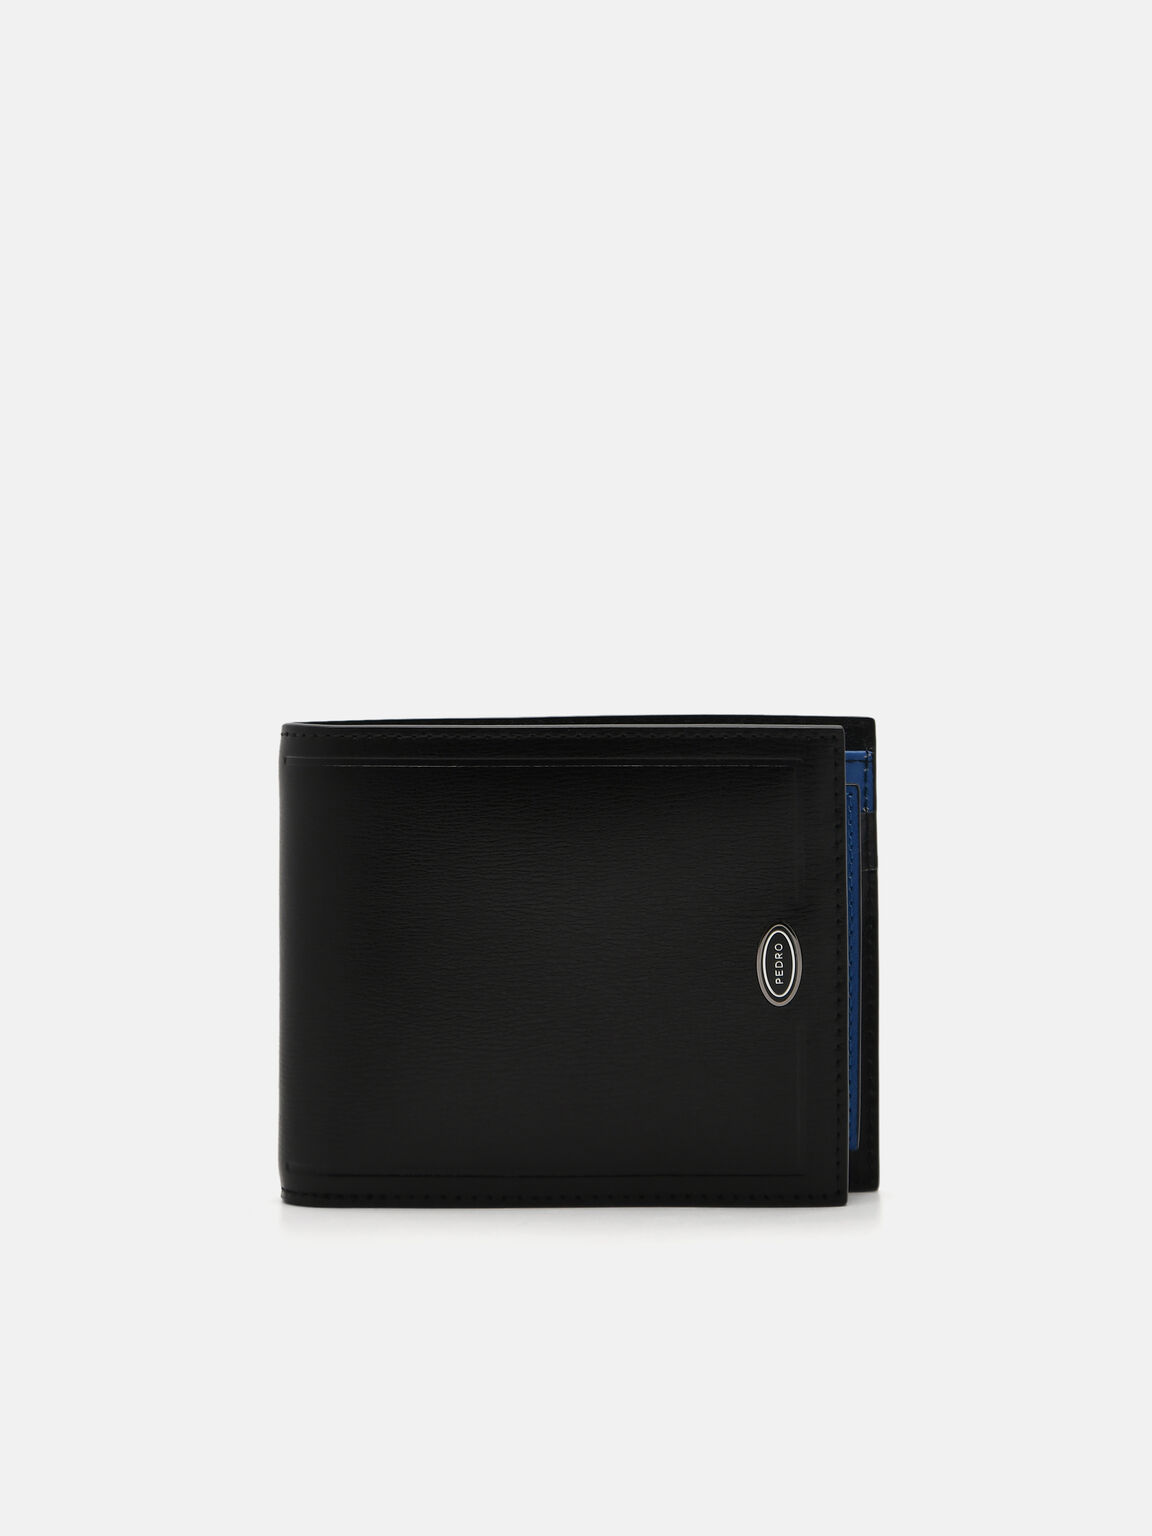 Black Leather Bi-Fold Wallet with Insert - PEDRO TH